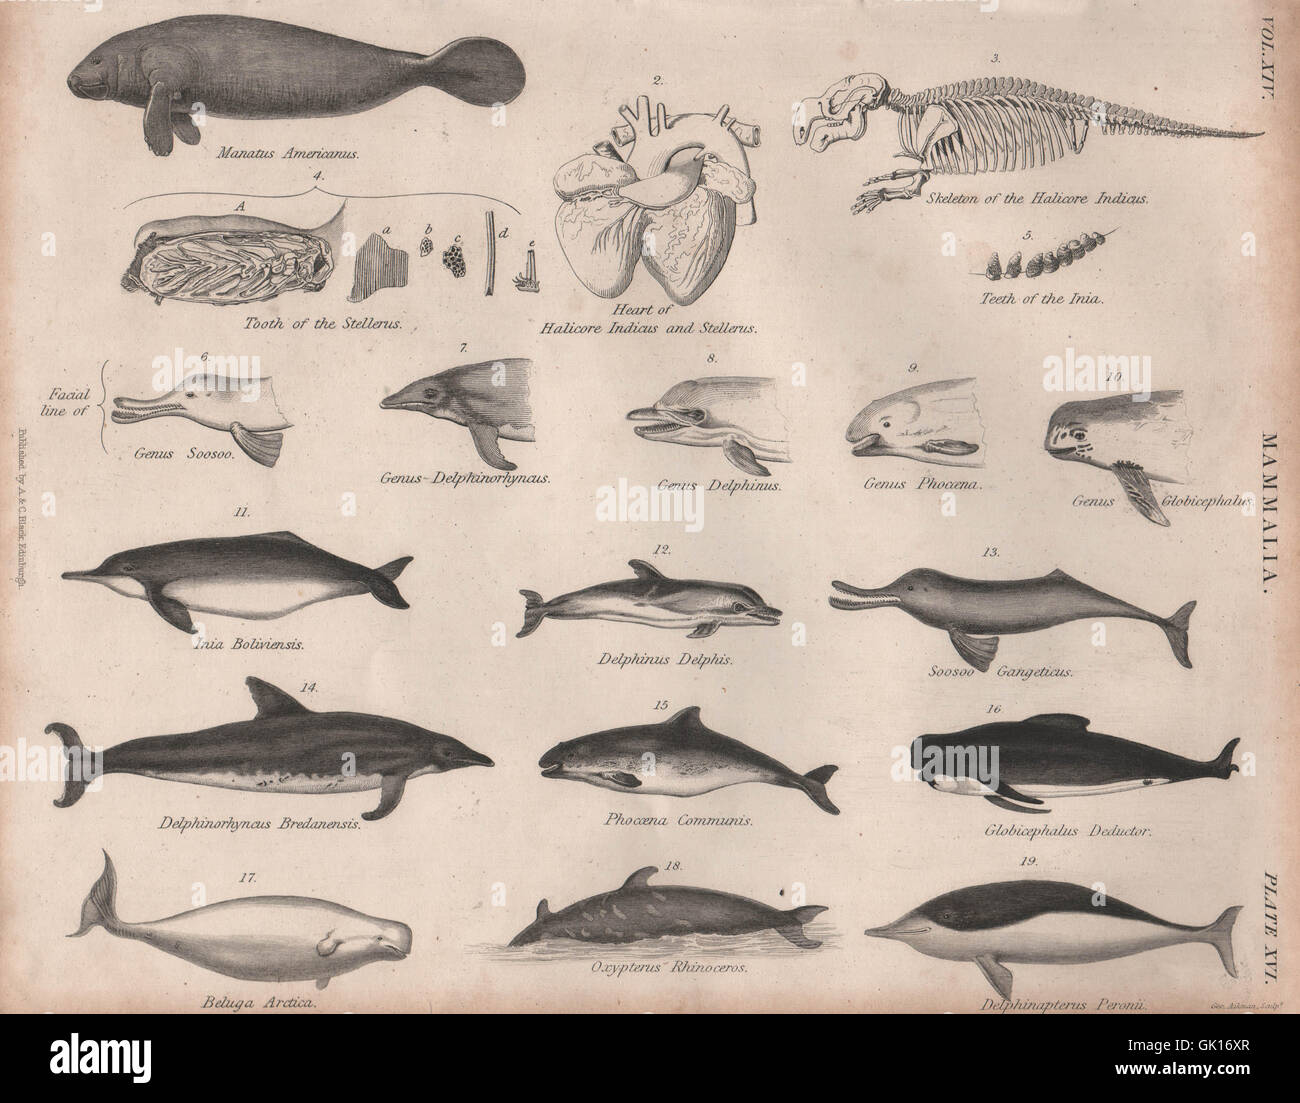 CETACEANS Rough-toothed Bolivian/Ganges river dolphin Beluga whale Manatee, 1860 Stock Photo